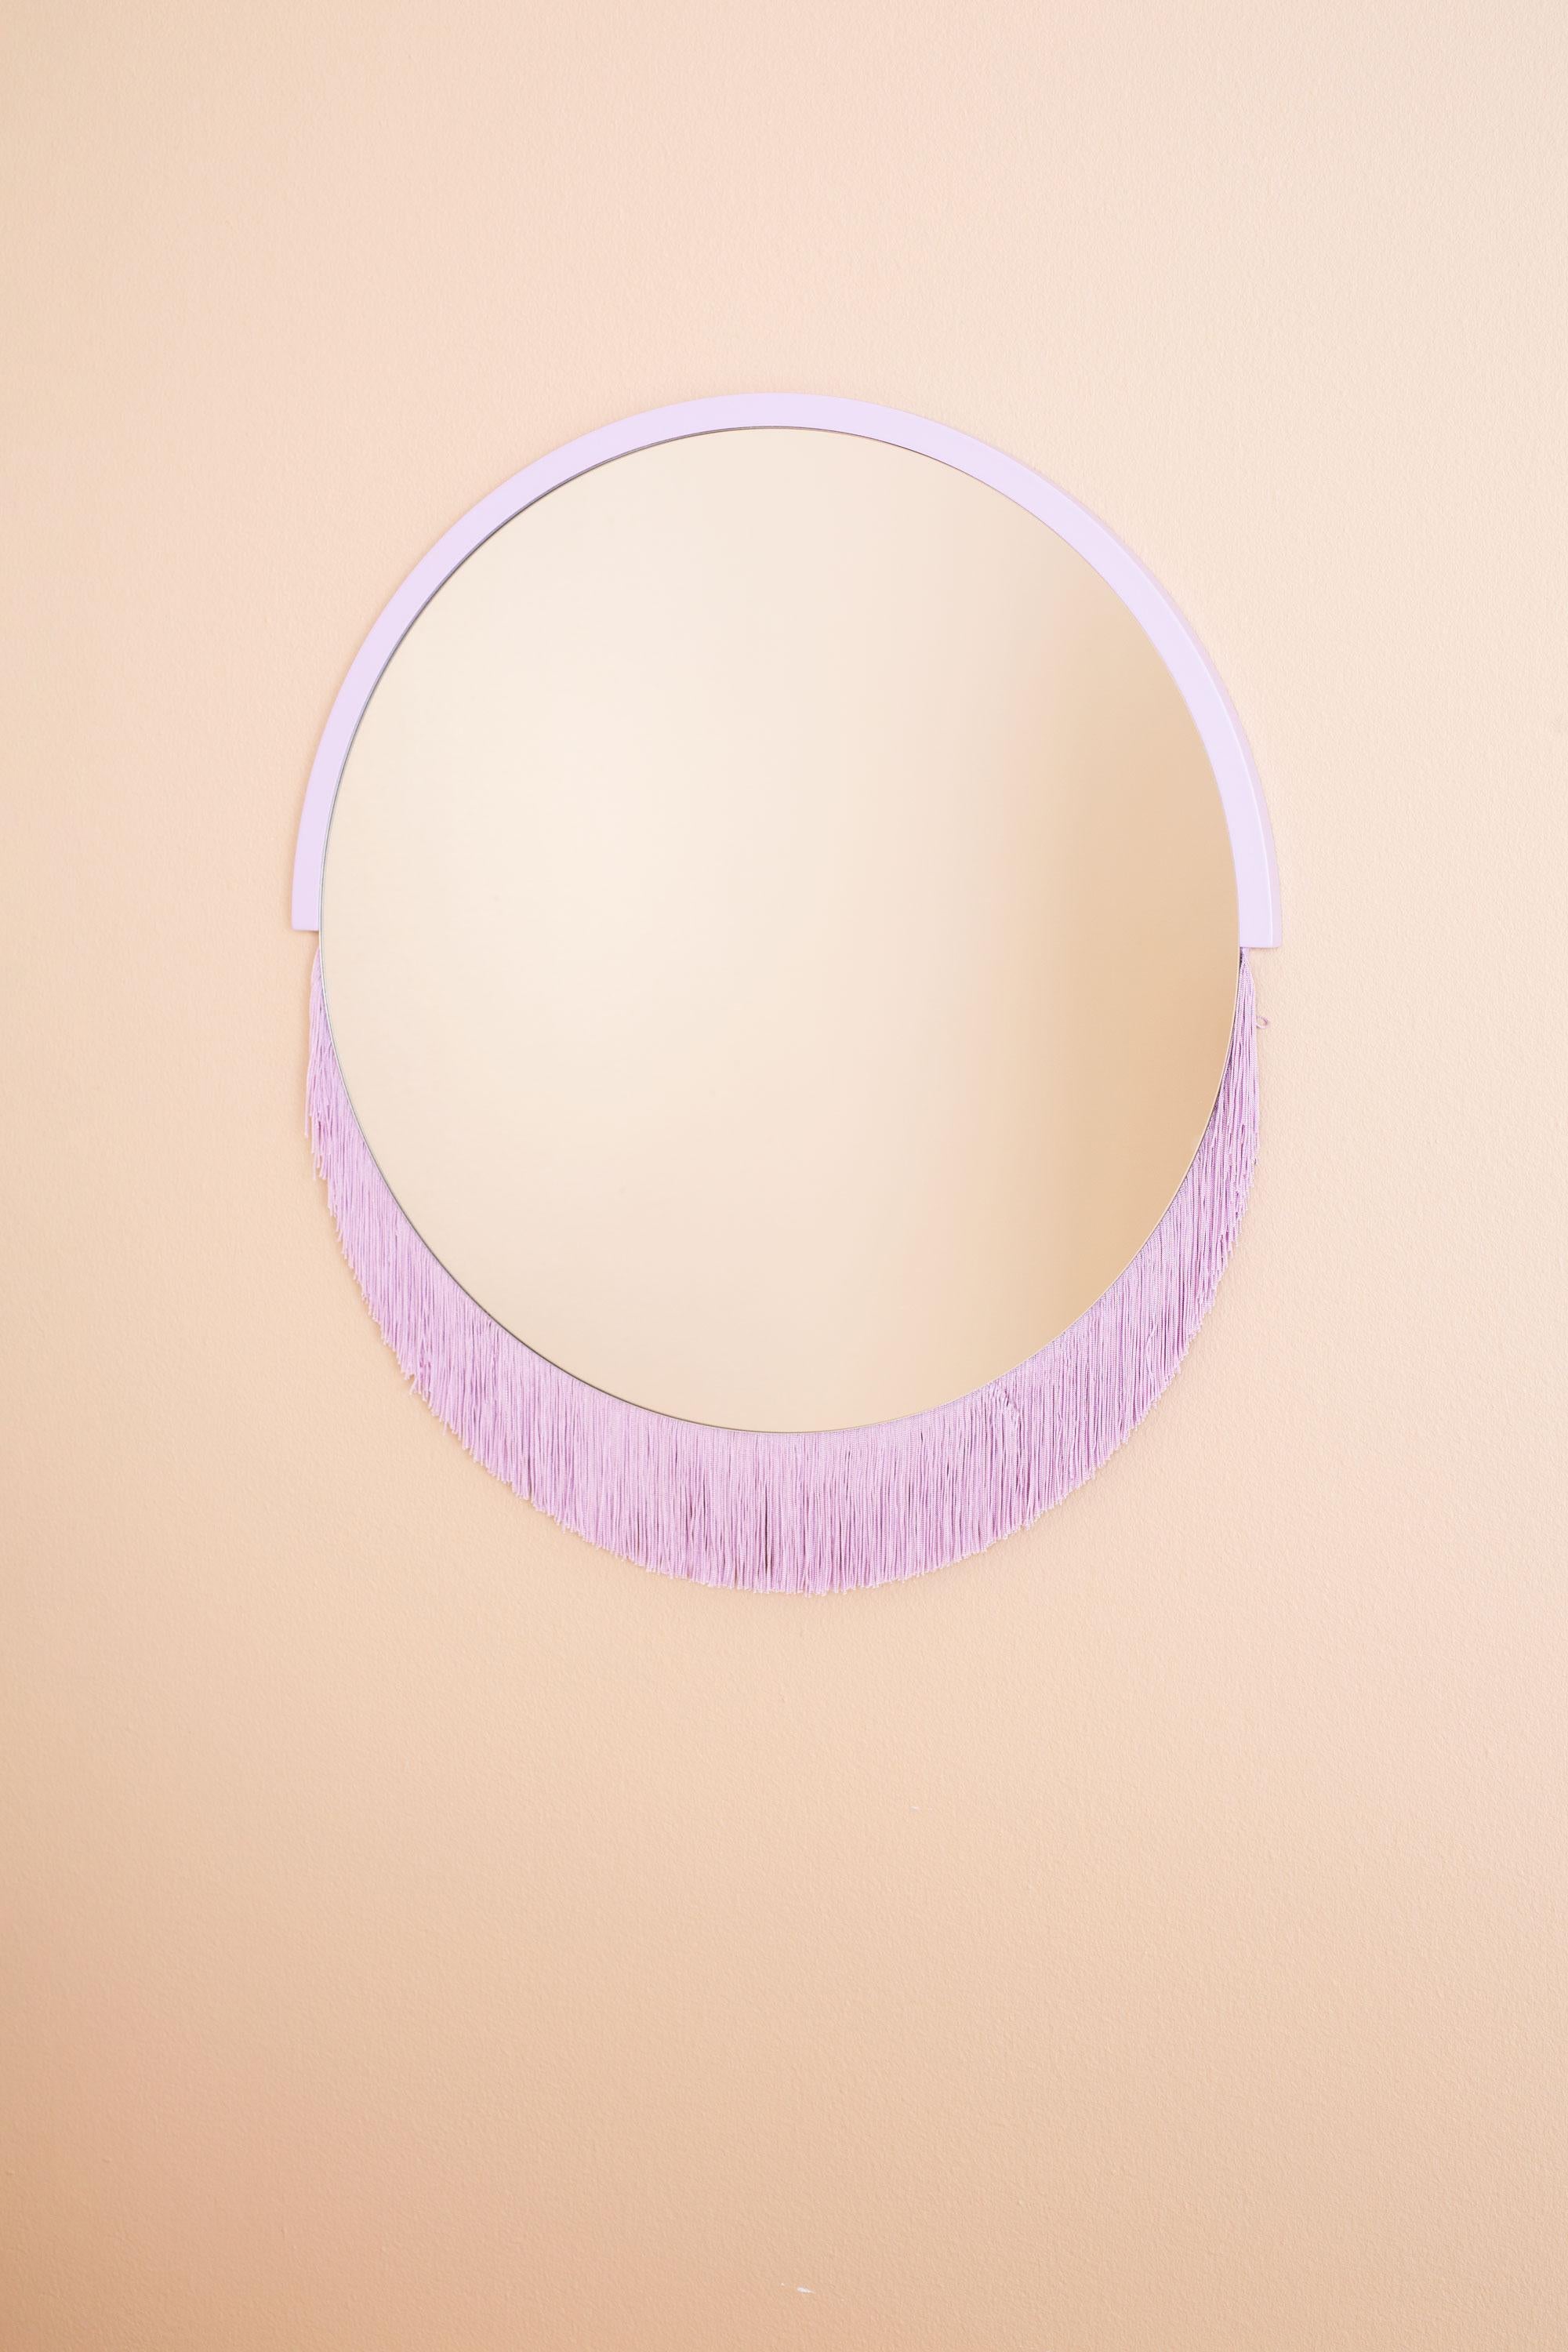 Boudoir Large Wall Mirror by Tero Kuitunen For Sale 5